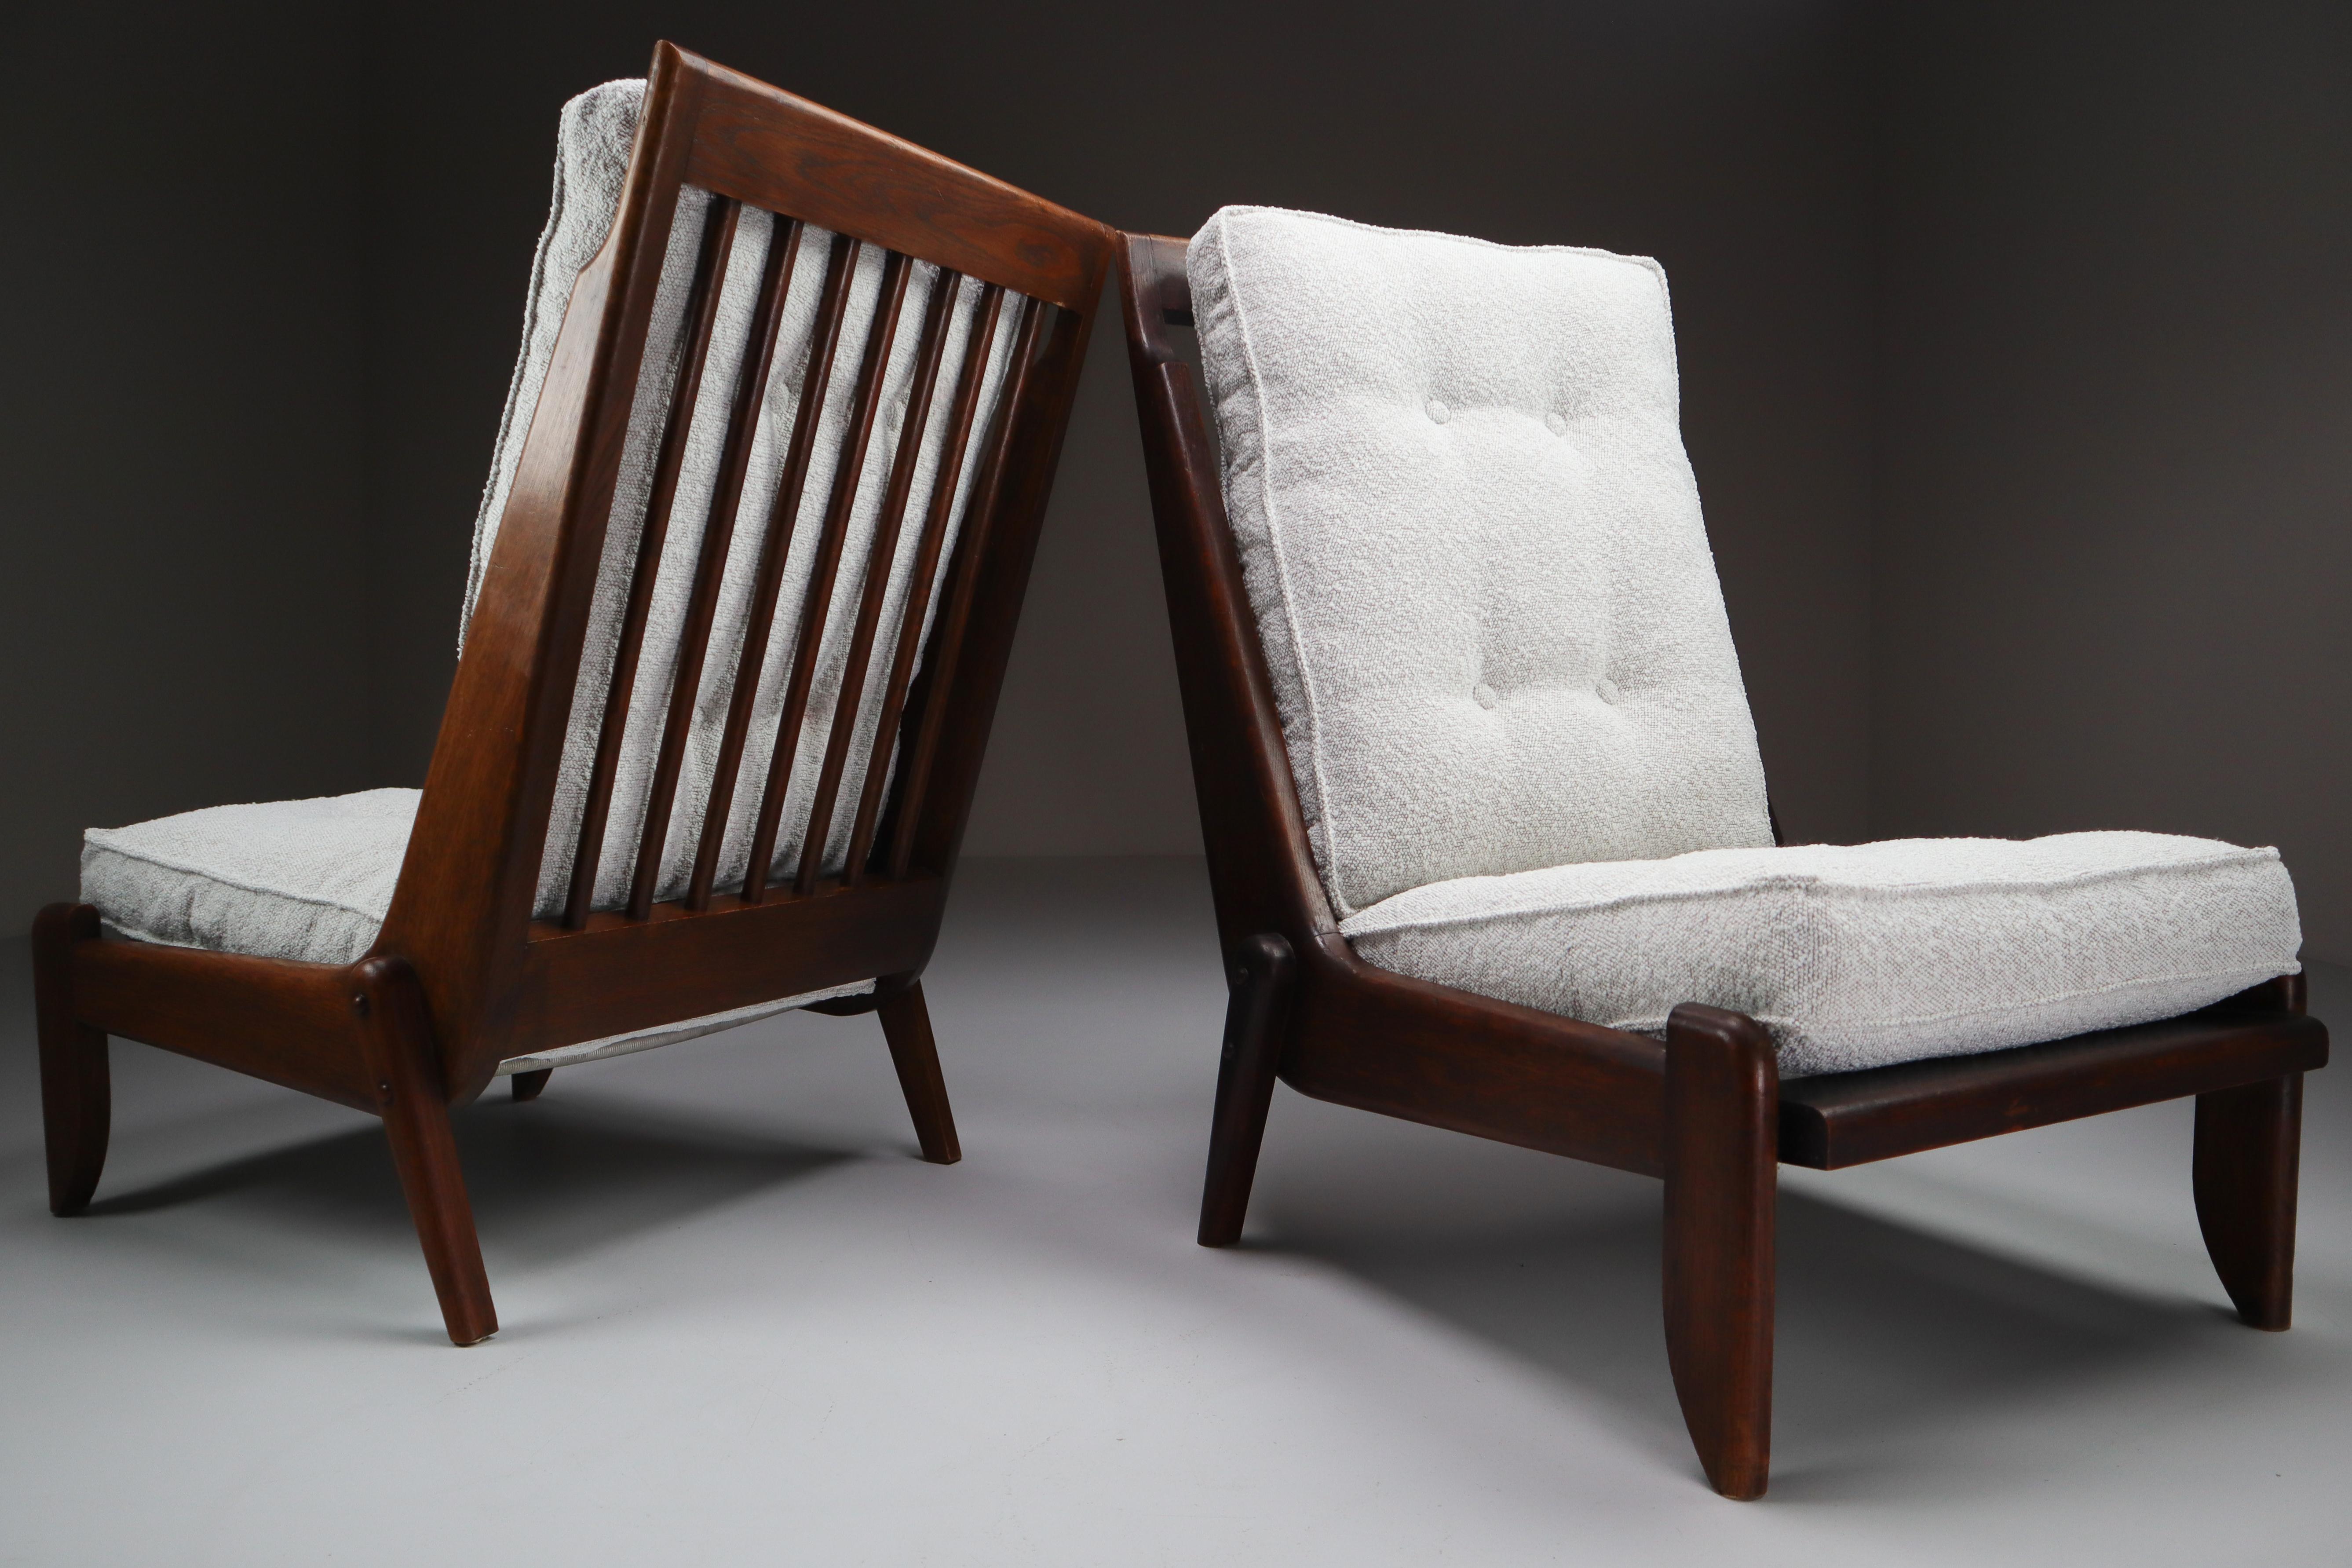 Guillerme & Chambron, pair of two lounge chairs in solid oak and reupholstered in bouclé fabric. 

Pair of two original midcentury lounge chairs manufactured and designed by Guillerme & Chambron in France, 1950s. Made of solid oak and